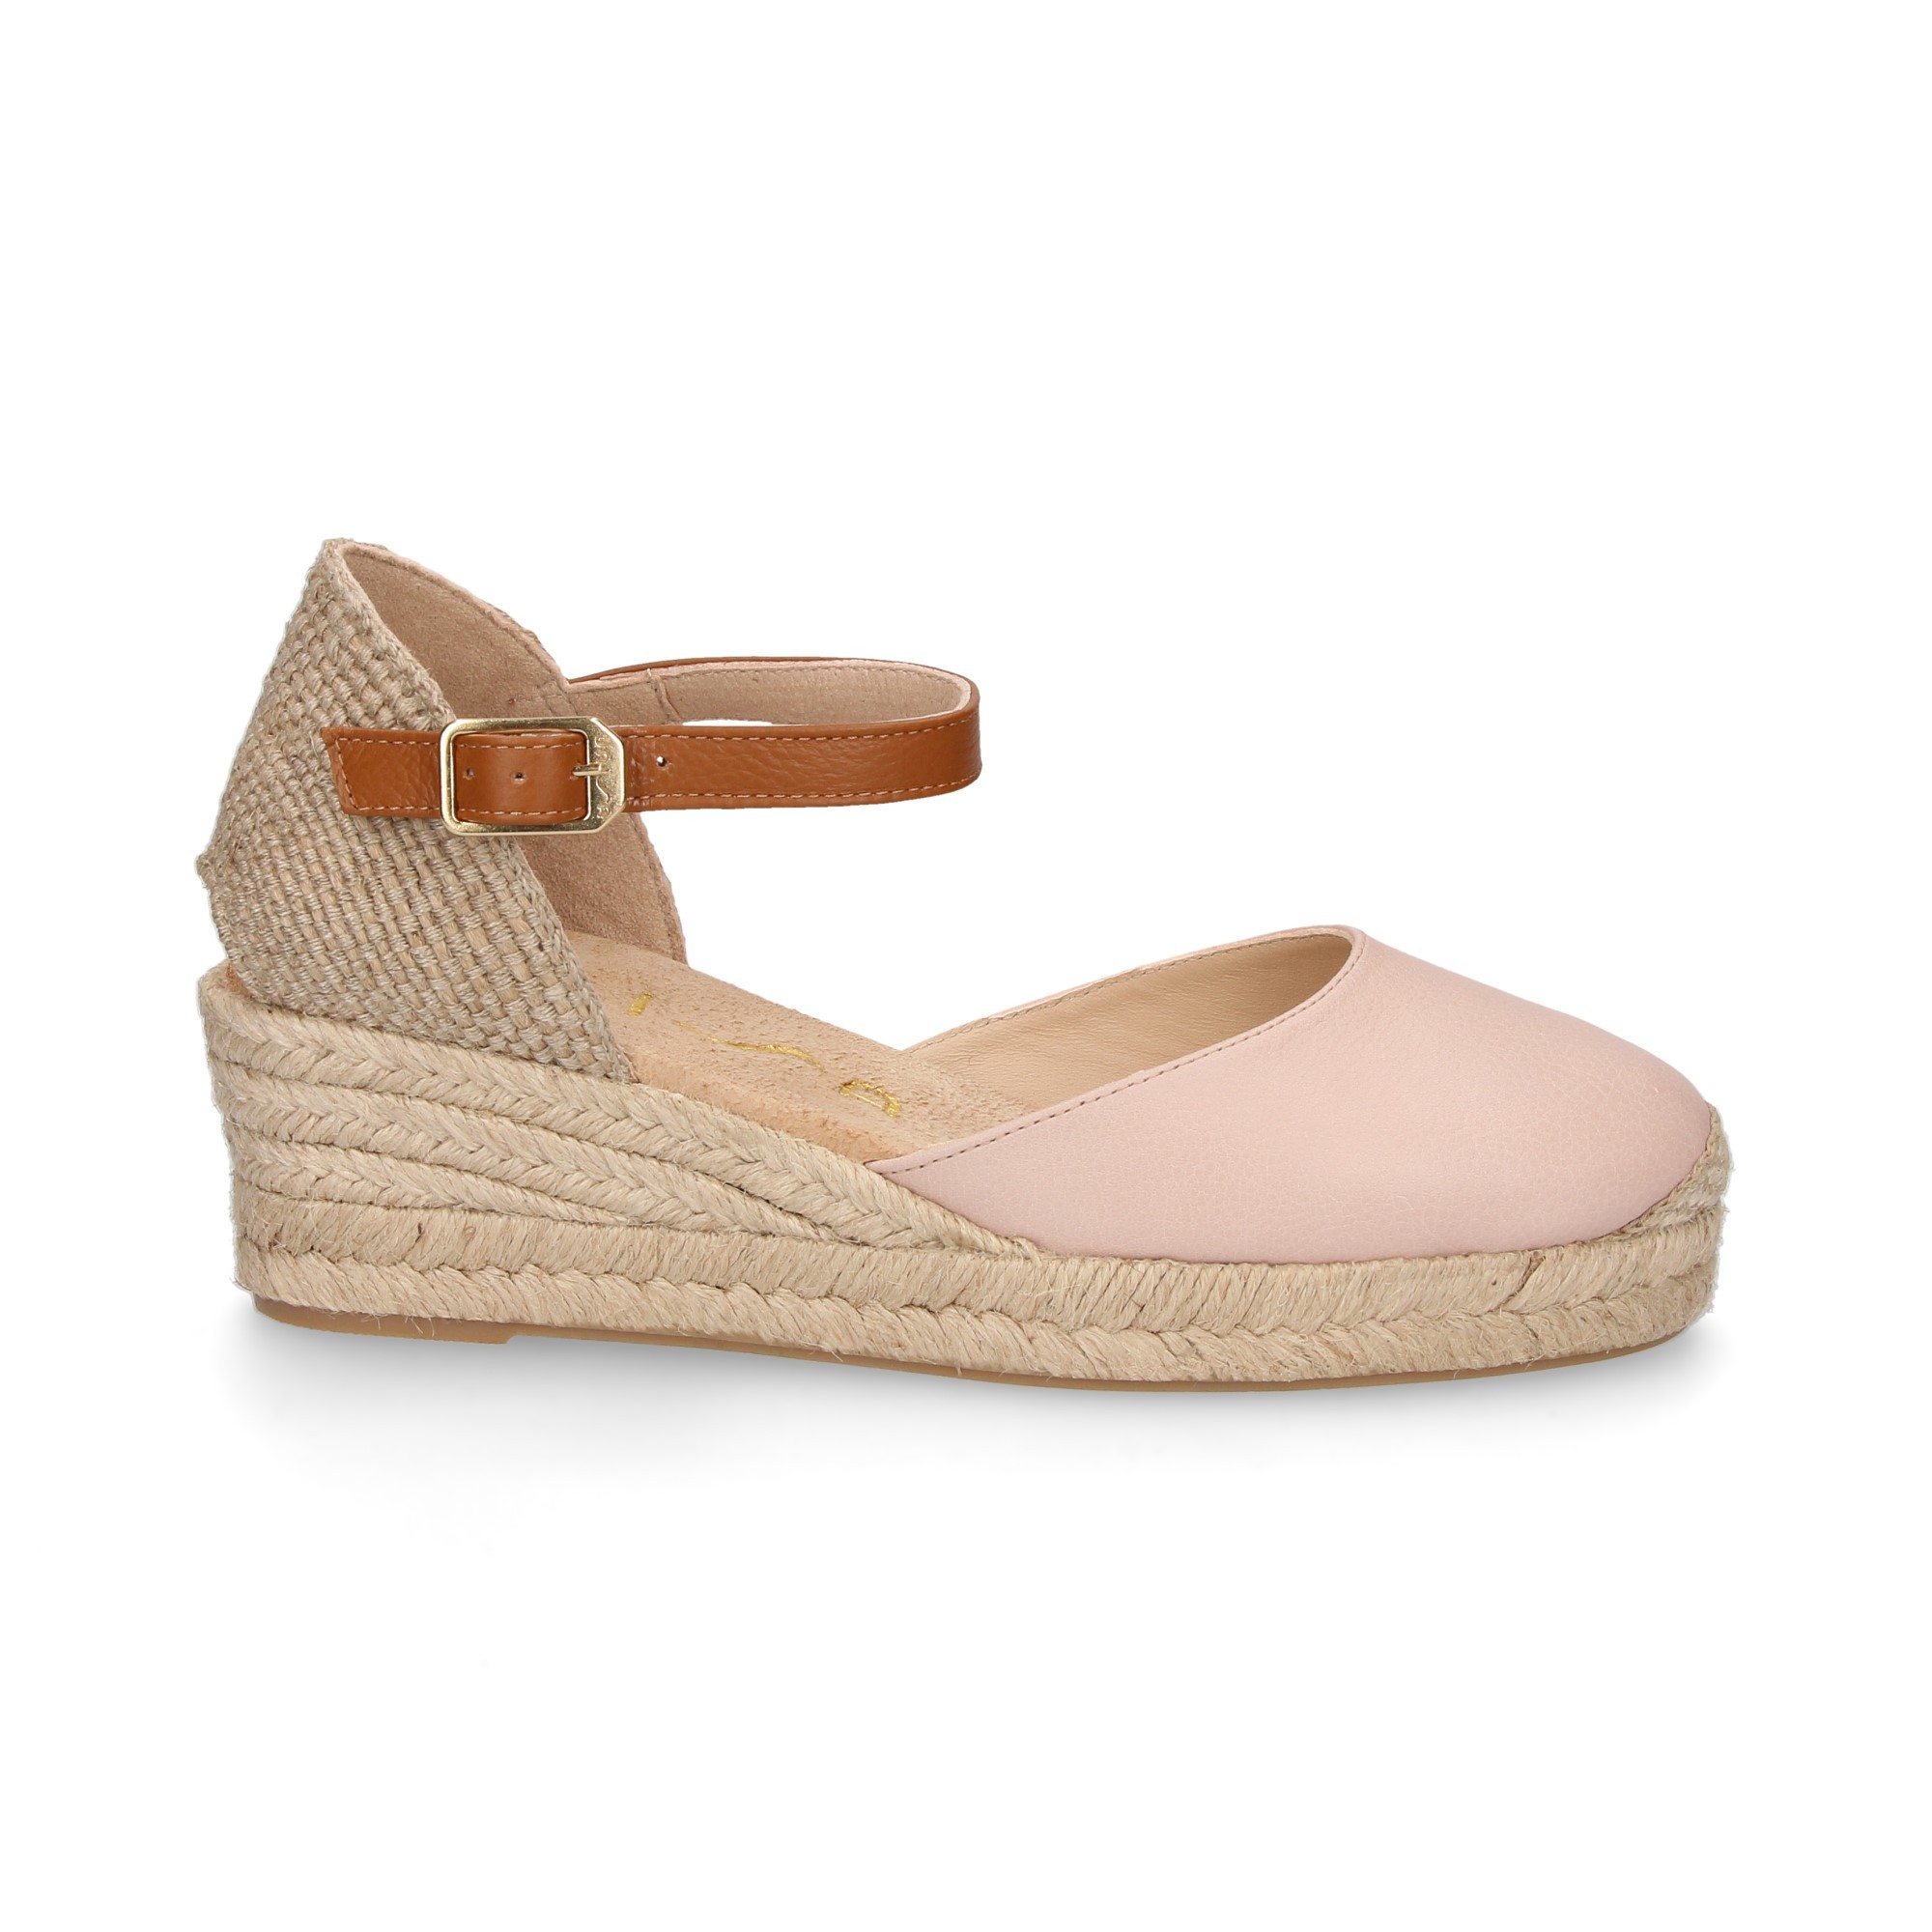 ESPADRILLE WEDGE ESPADRILLE ESPADRILLE LOW PINK LEATHER